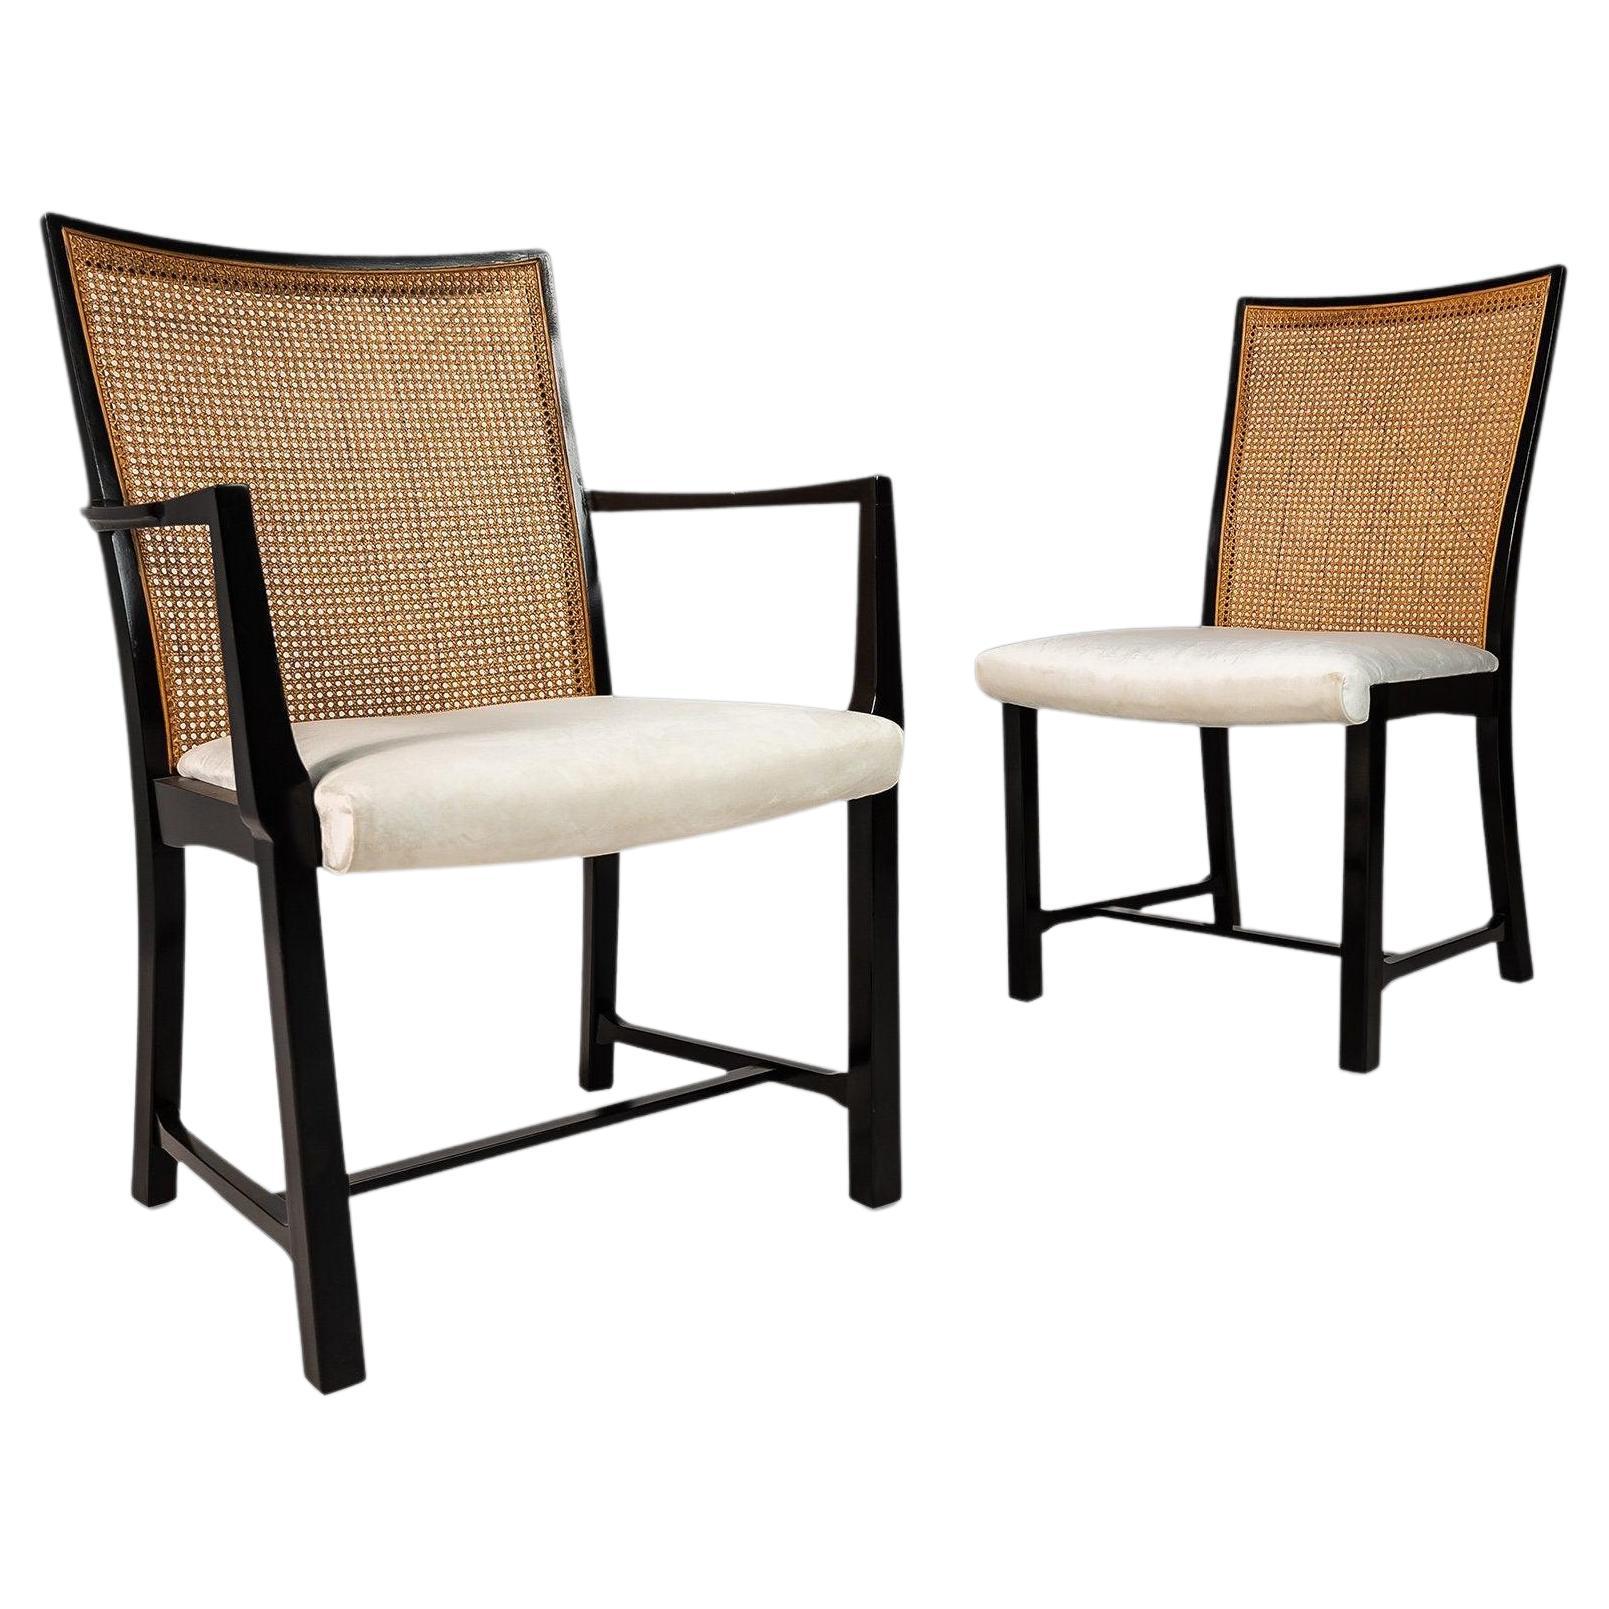 Set of Six (6) Ebonized Dining Chairs with Cane Backs by Michael Taylor for Bake For Sale